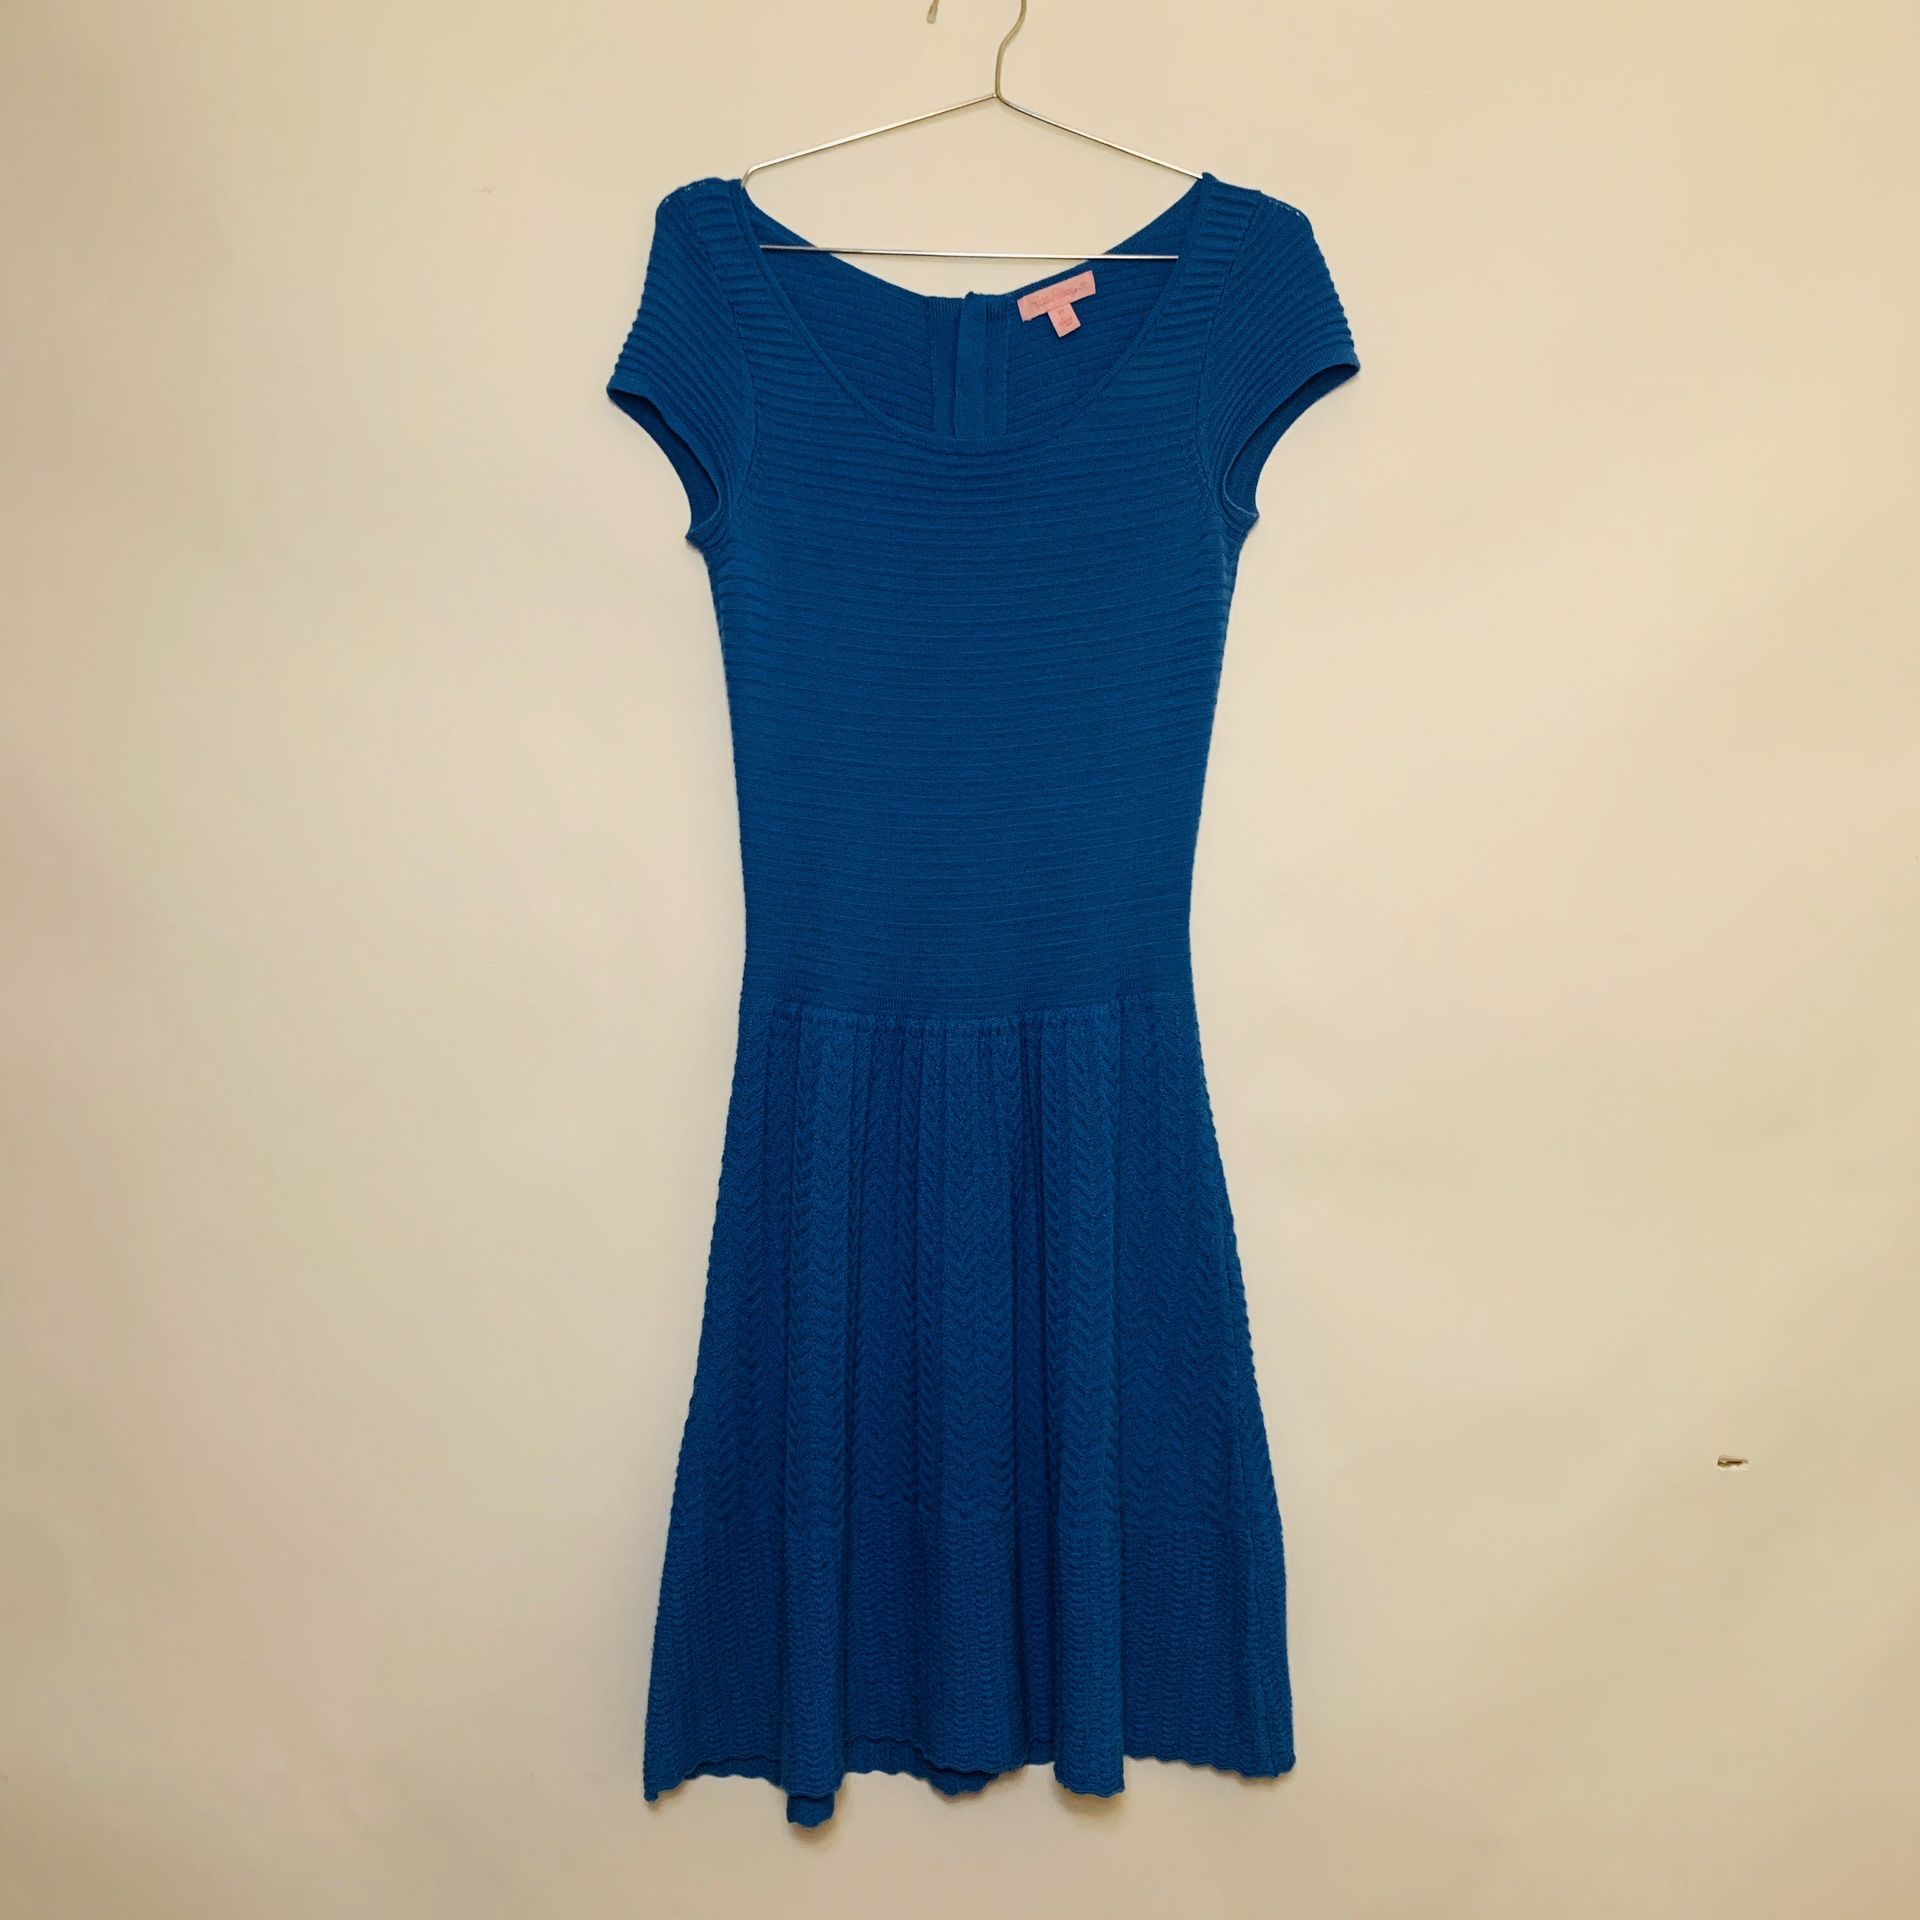 Lilly Pulitzer Blue Ribbed Dress